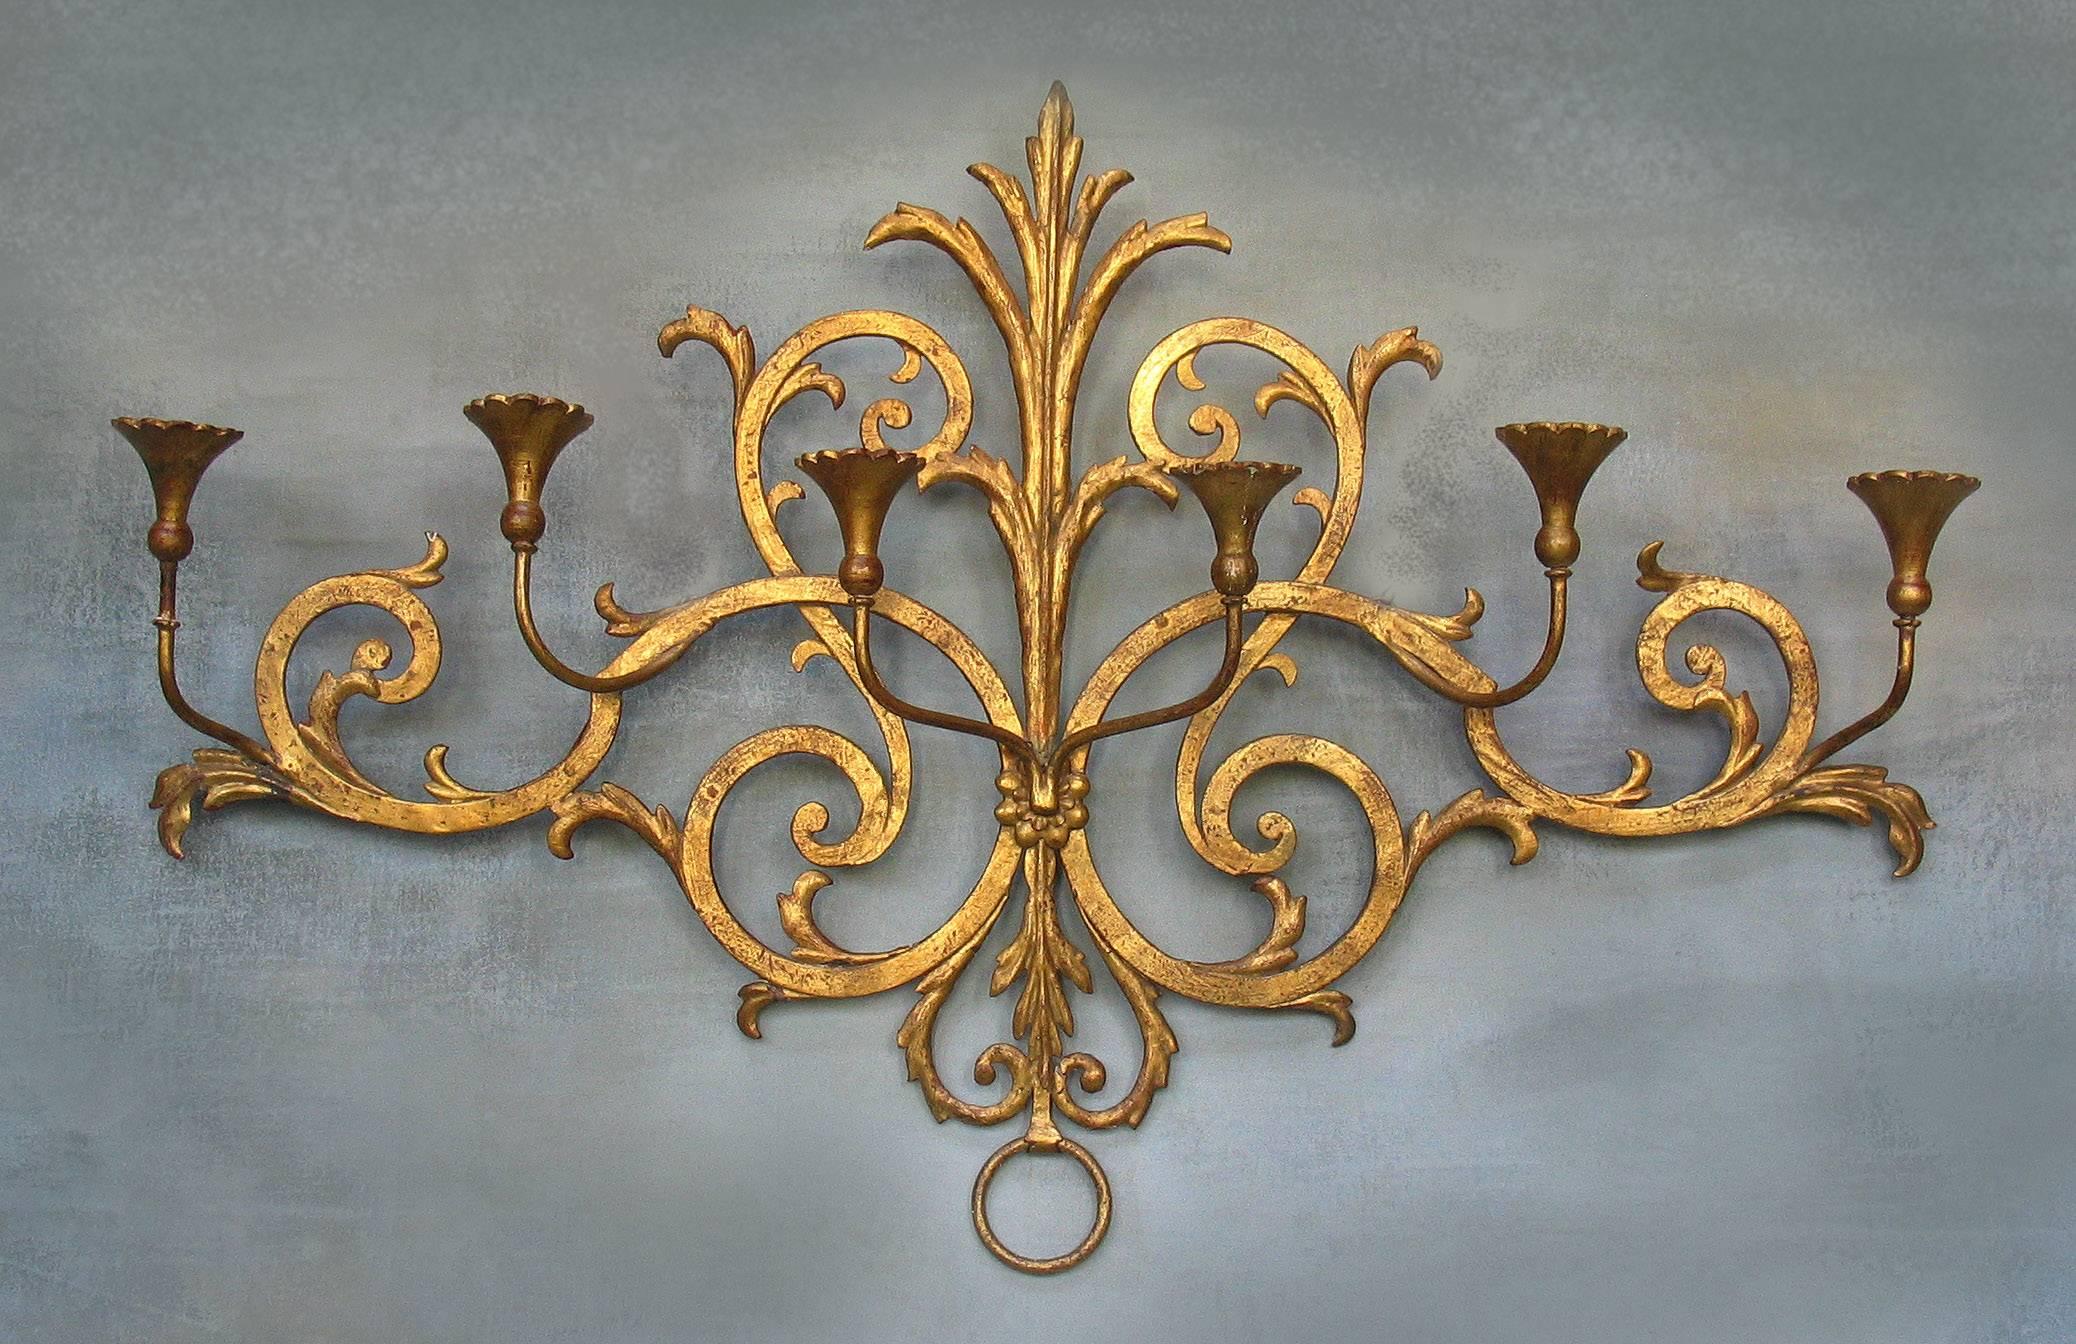 Baroque Large Italian Gilt Wrought Iron Six-Light Wall Candle Sconce